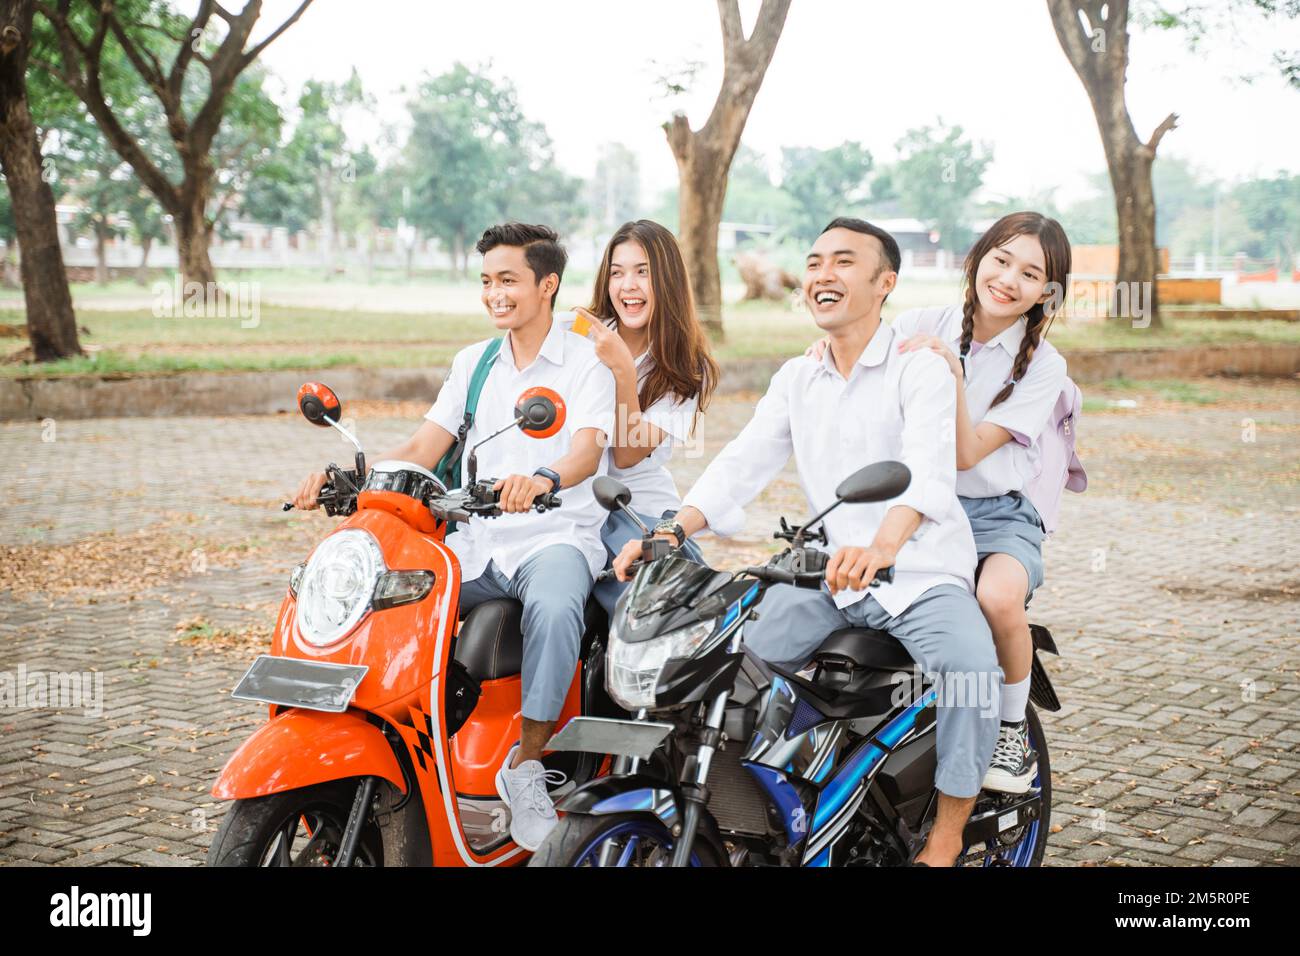 Group of high school students riding a motorcycle without helmet Stock Photo